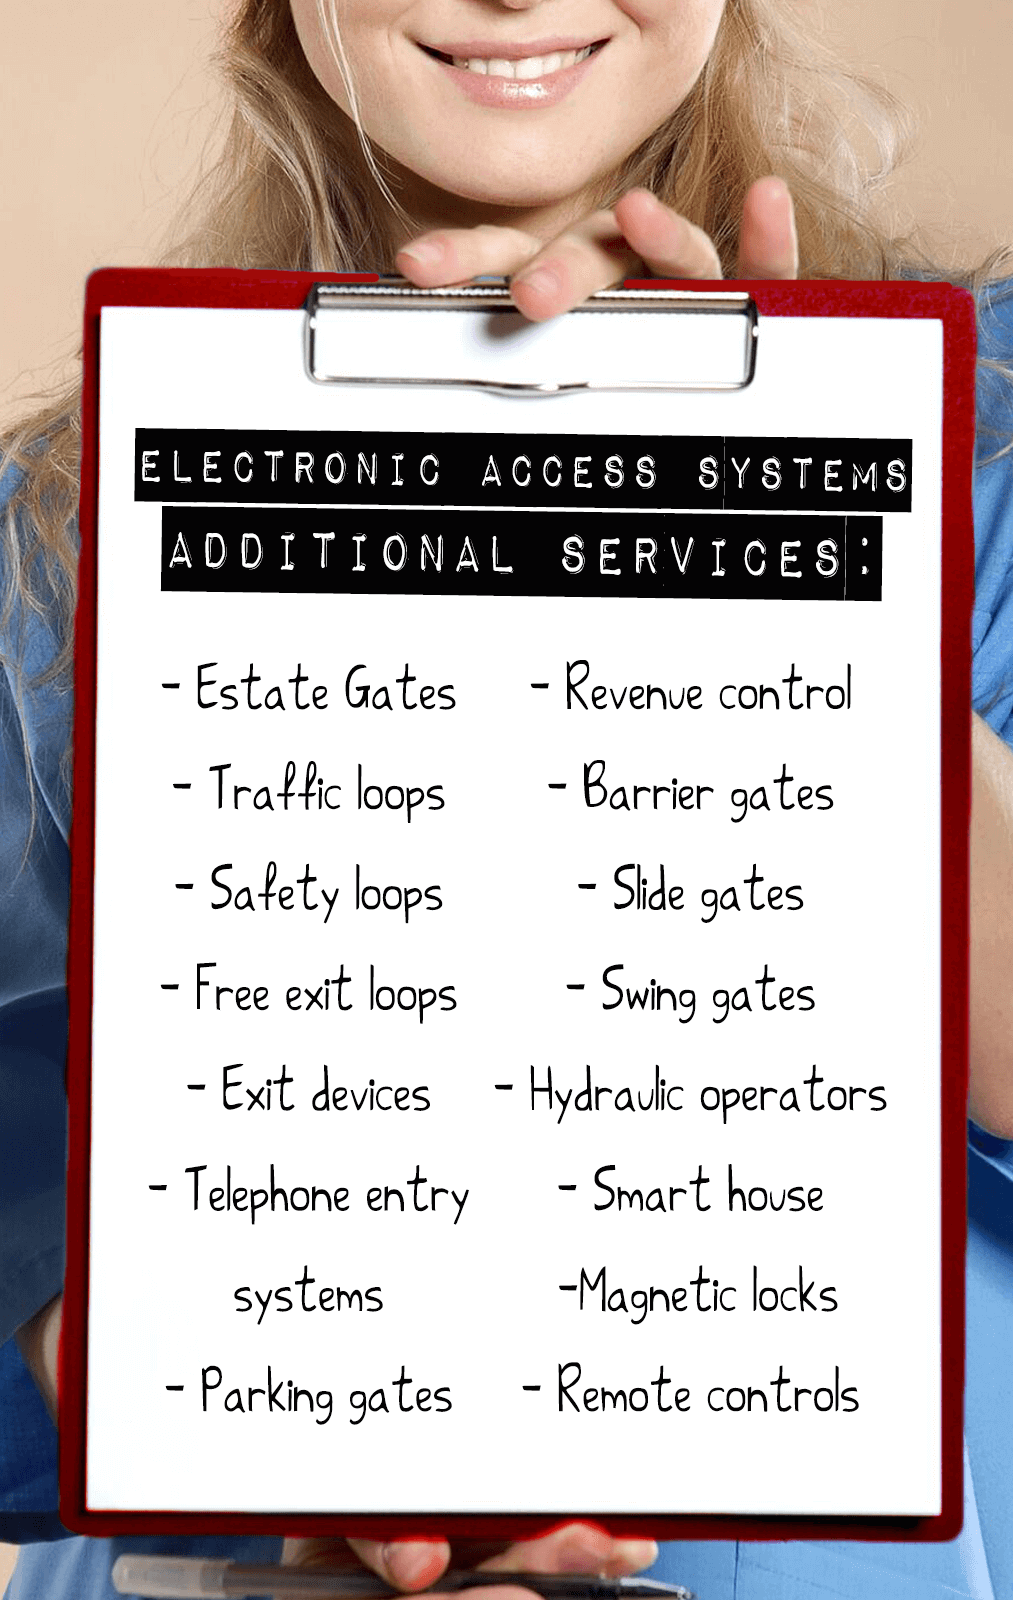 Electronic Access Systems Additional Services